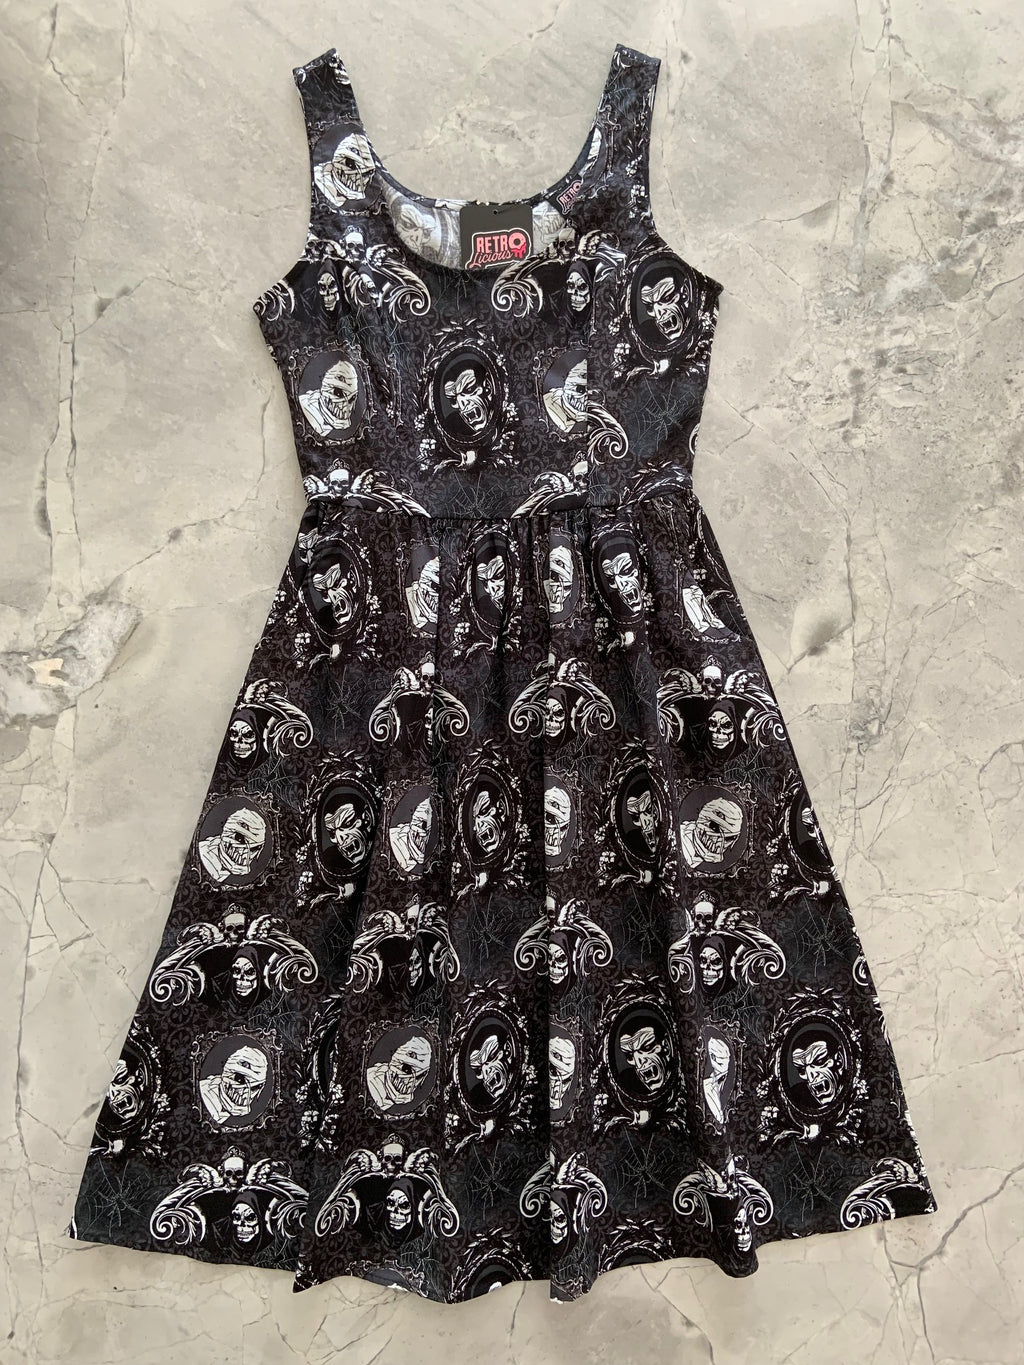 5026 Monsters Fit & Flare Dress - XS only, 1 left!